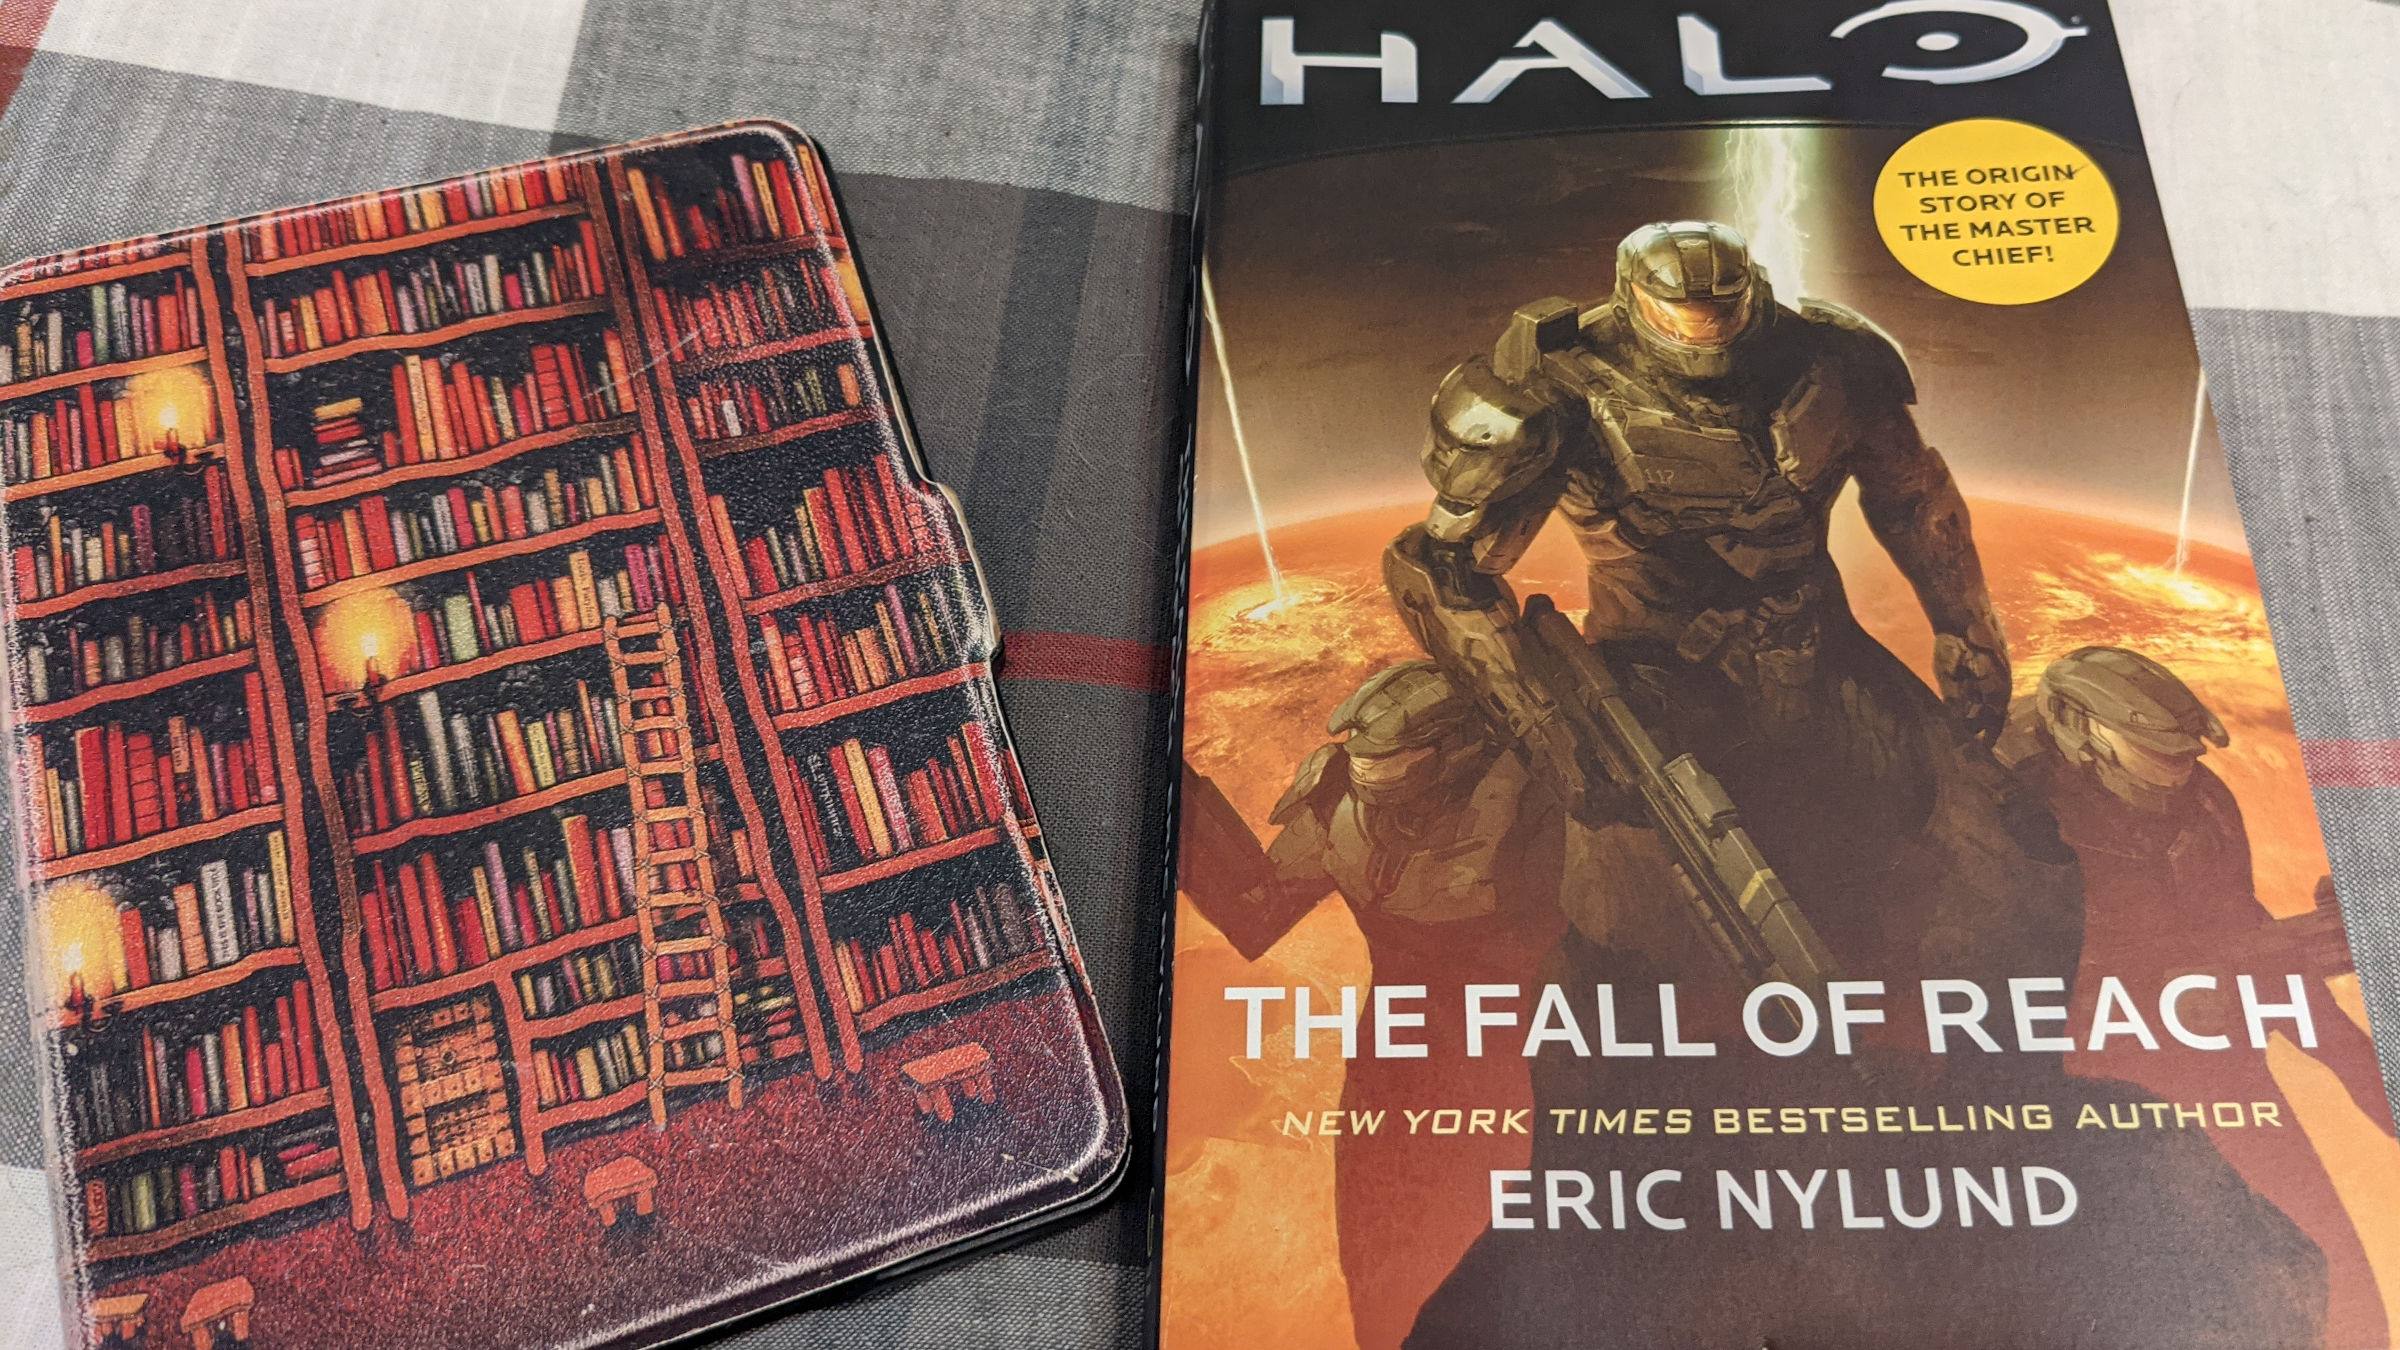 Amazon Kindle and paperback copy of ‘Halo: The Fall of Reach’ lying on a plaid bedspread.